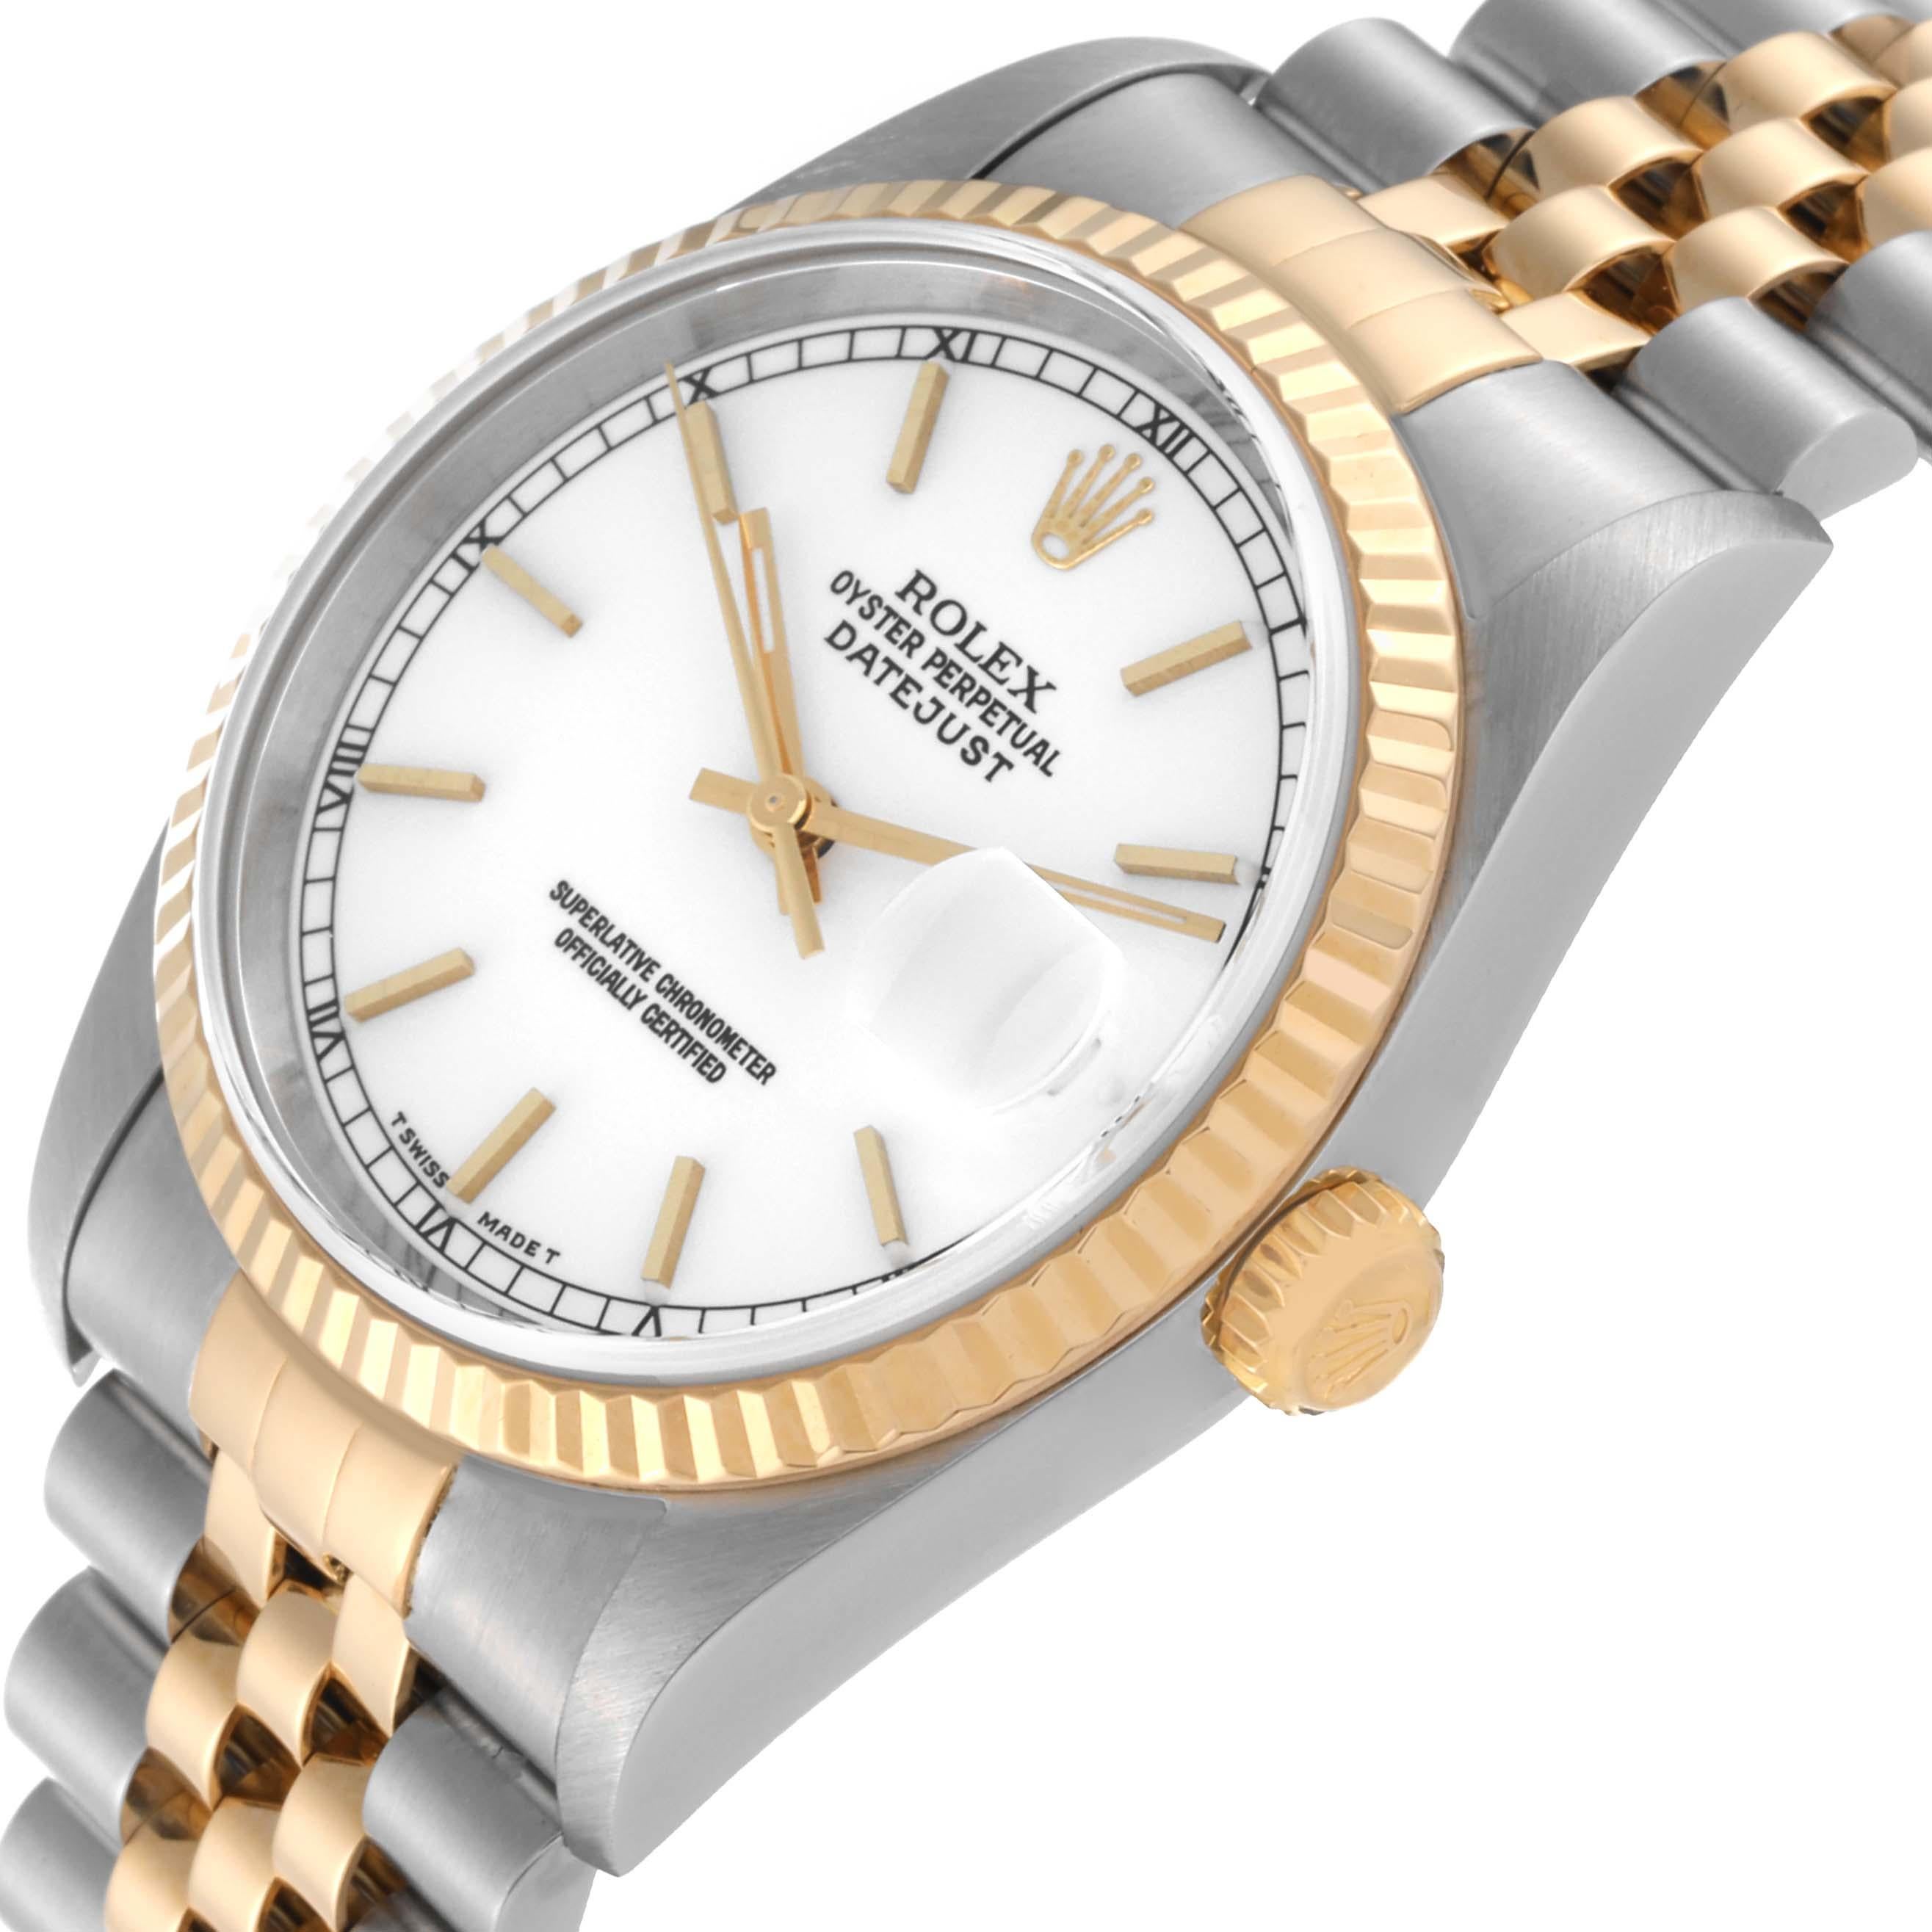 Rolex Datejust 36 Steel Yellow Gold White Dial Mens Watch 16233 For Sale 2